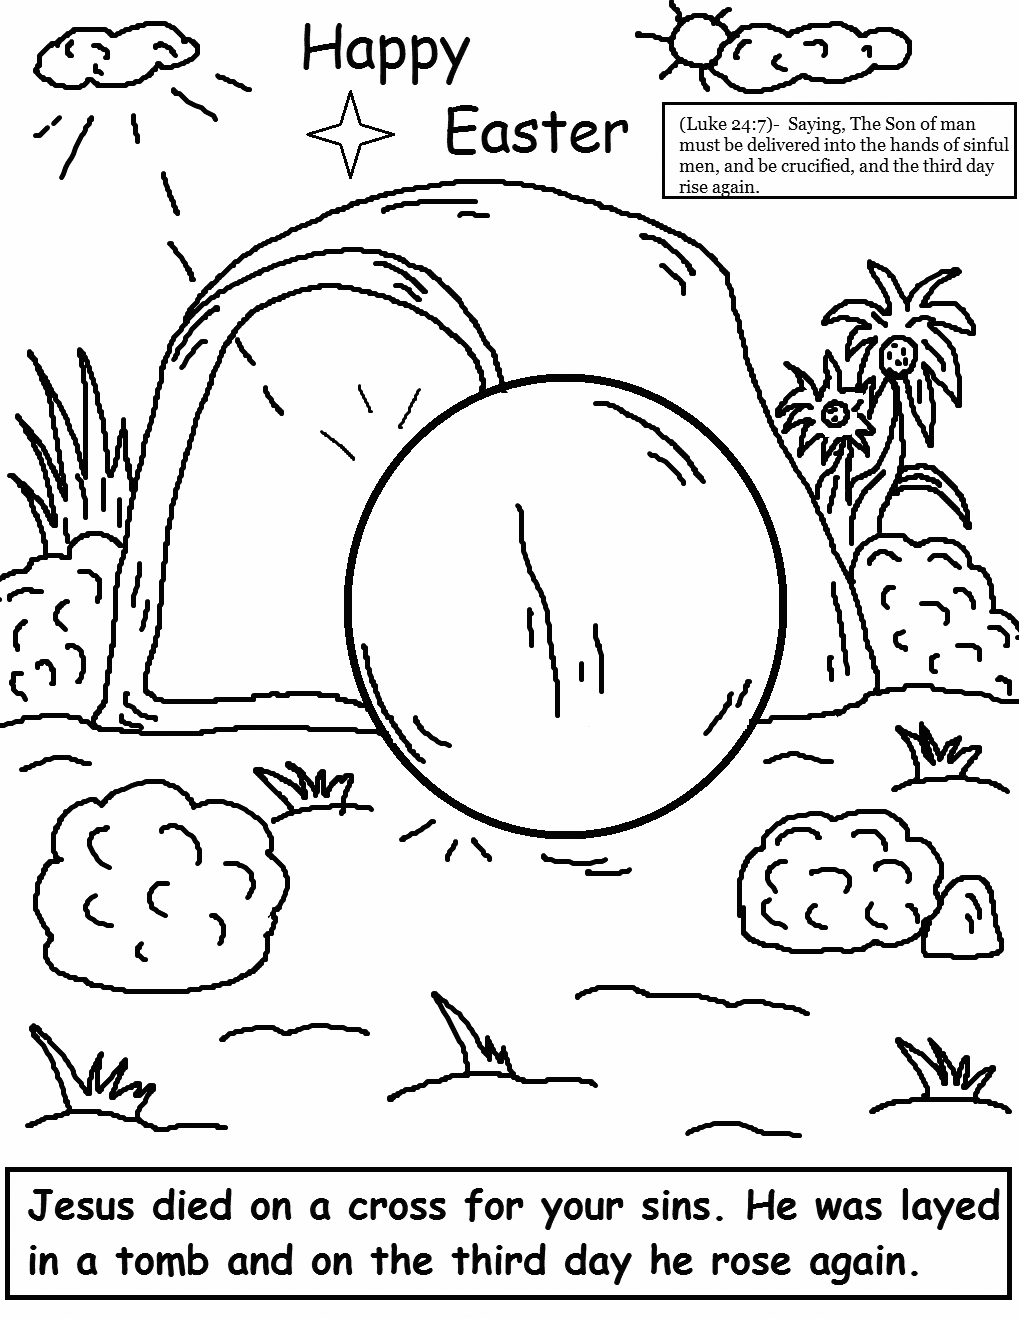 Happy Religious Easter Coloring Page